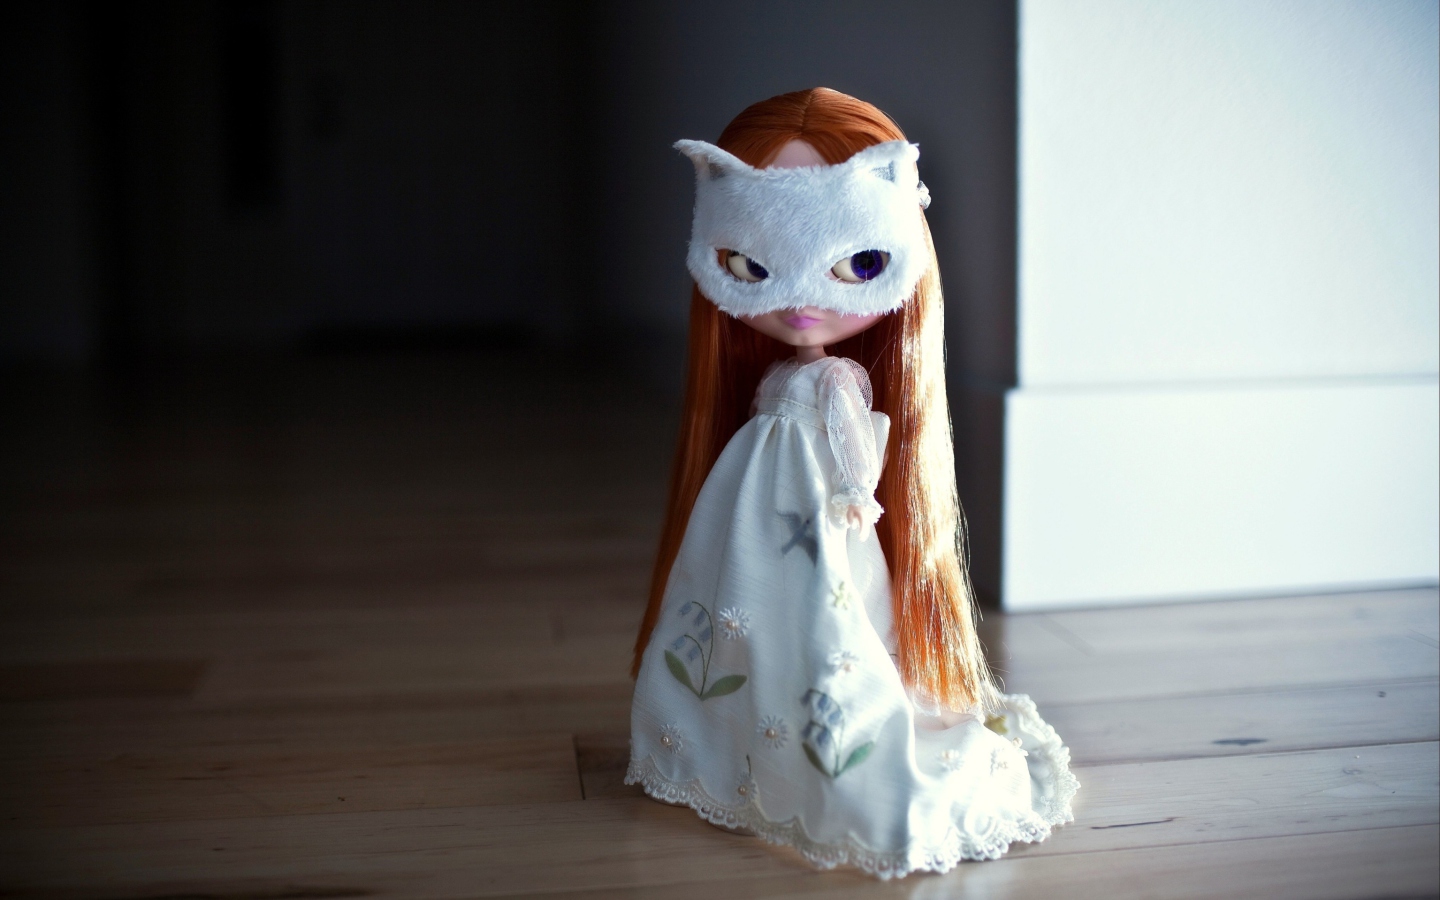 Das Doll With Cat Mask Wallpaper 1440x900